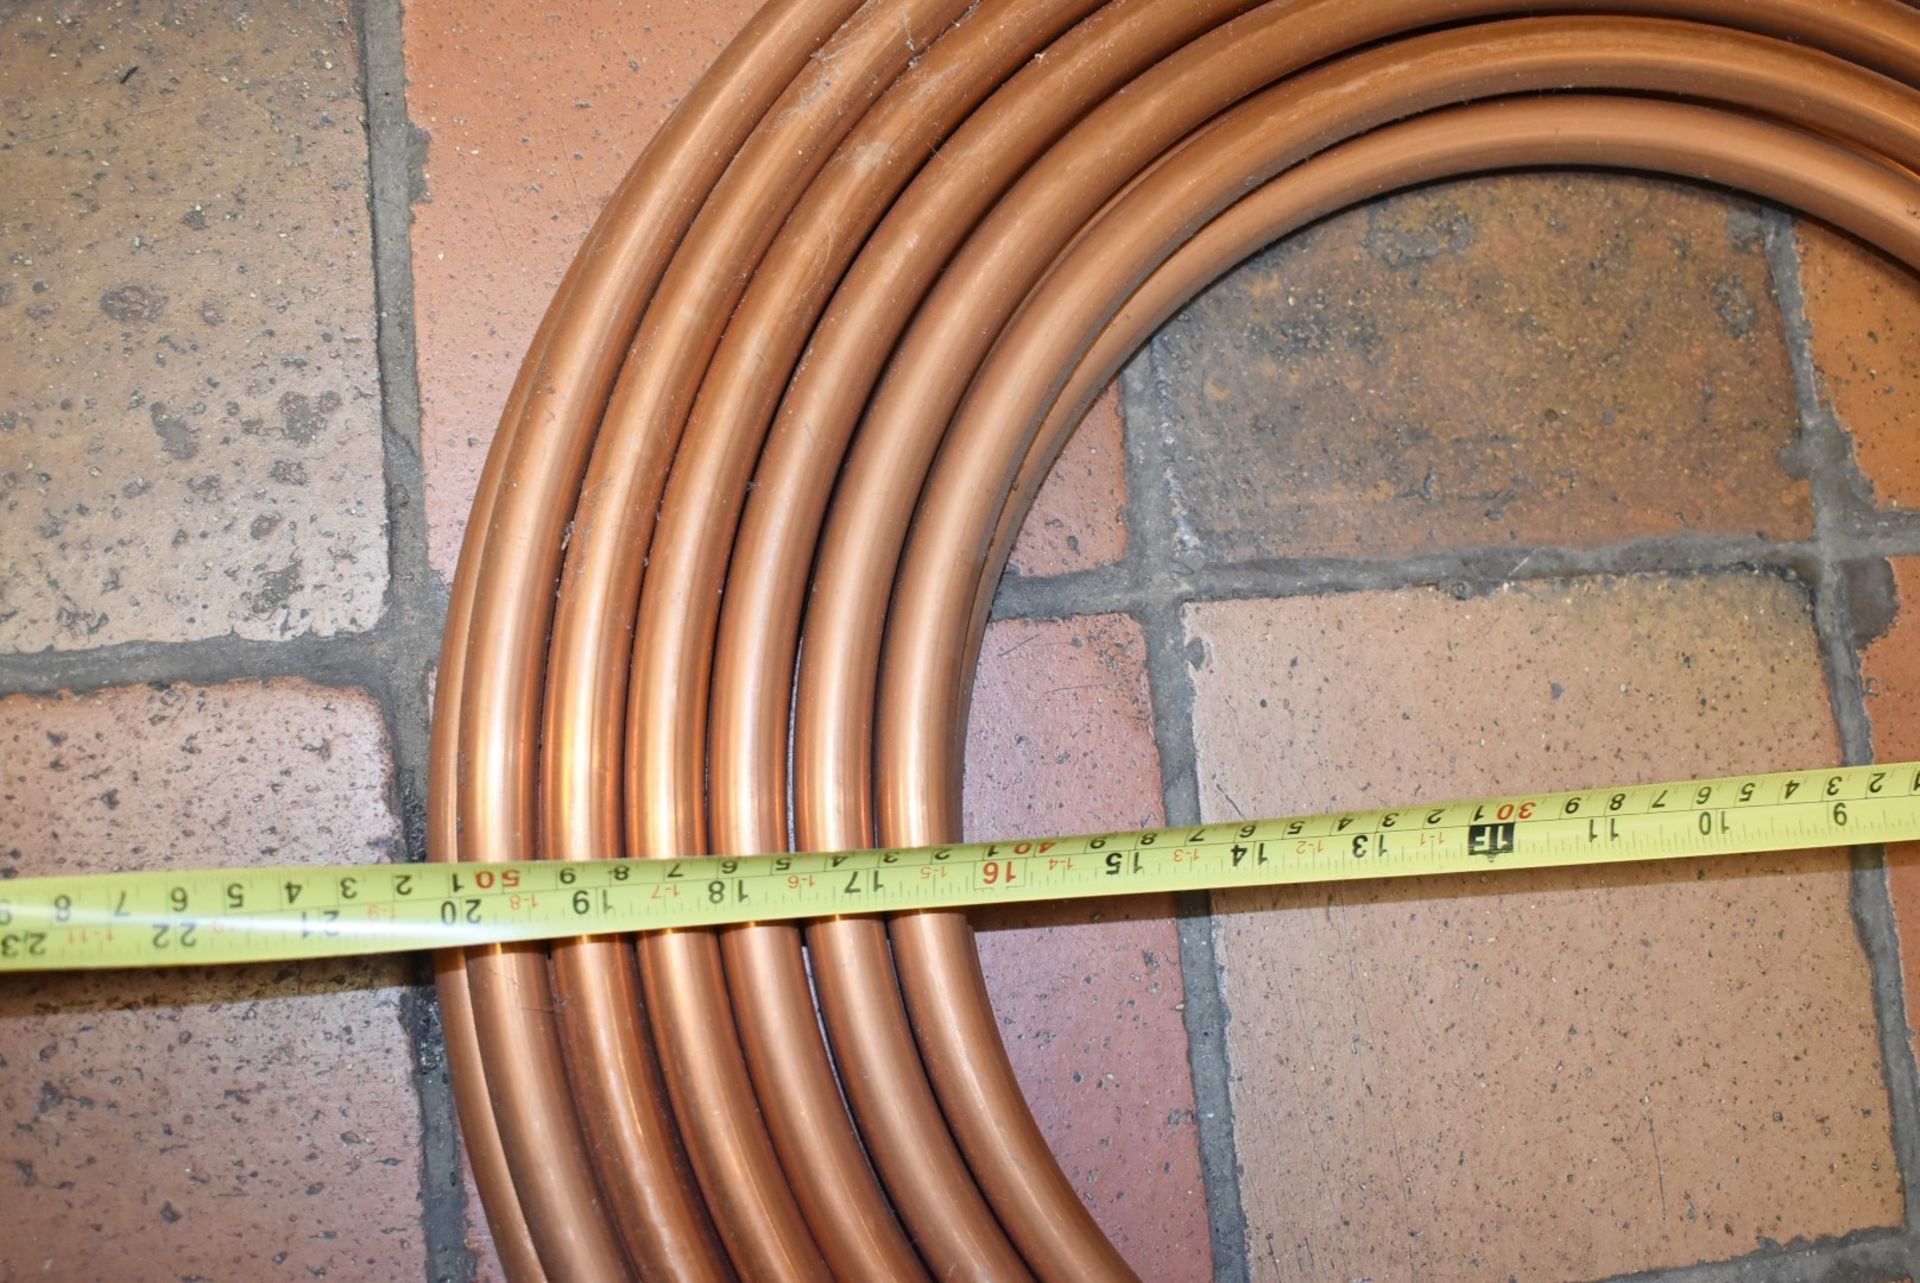 1 x Reel of Unused Copper Tubing - Approx Diameter 20 Inches - Image 4 of 4